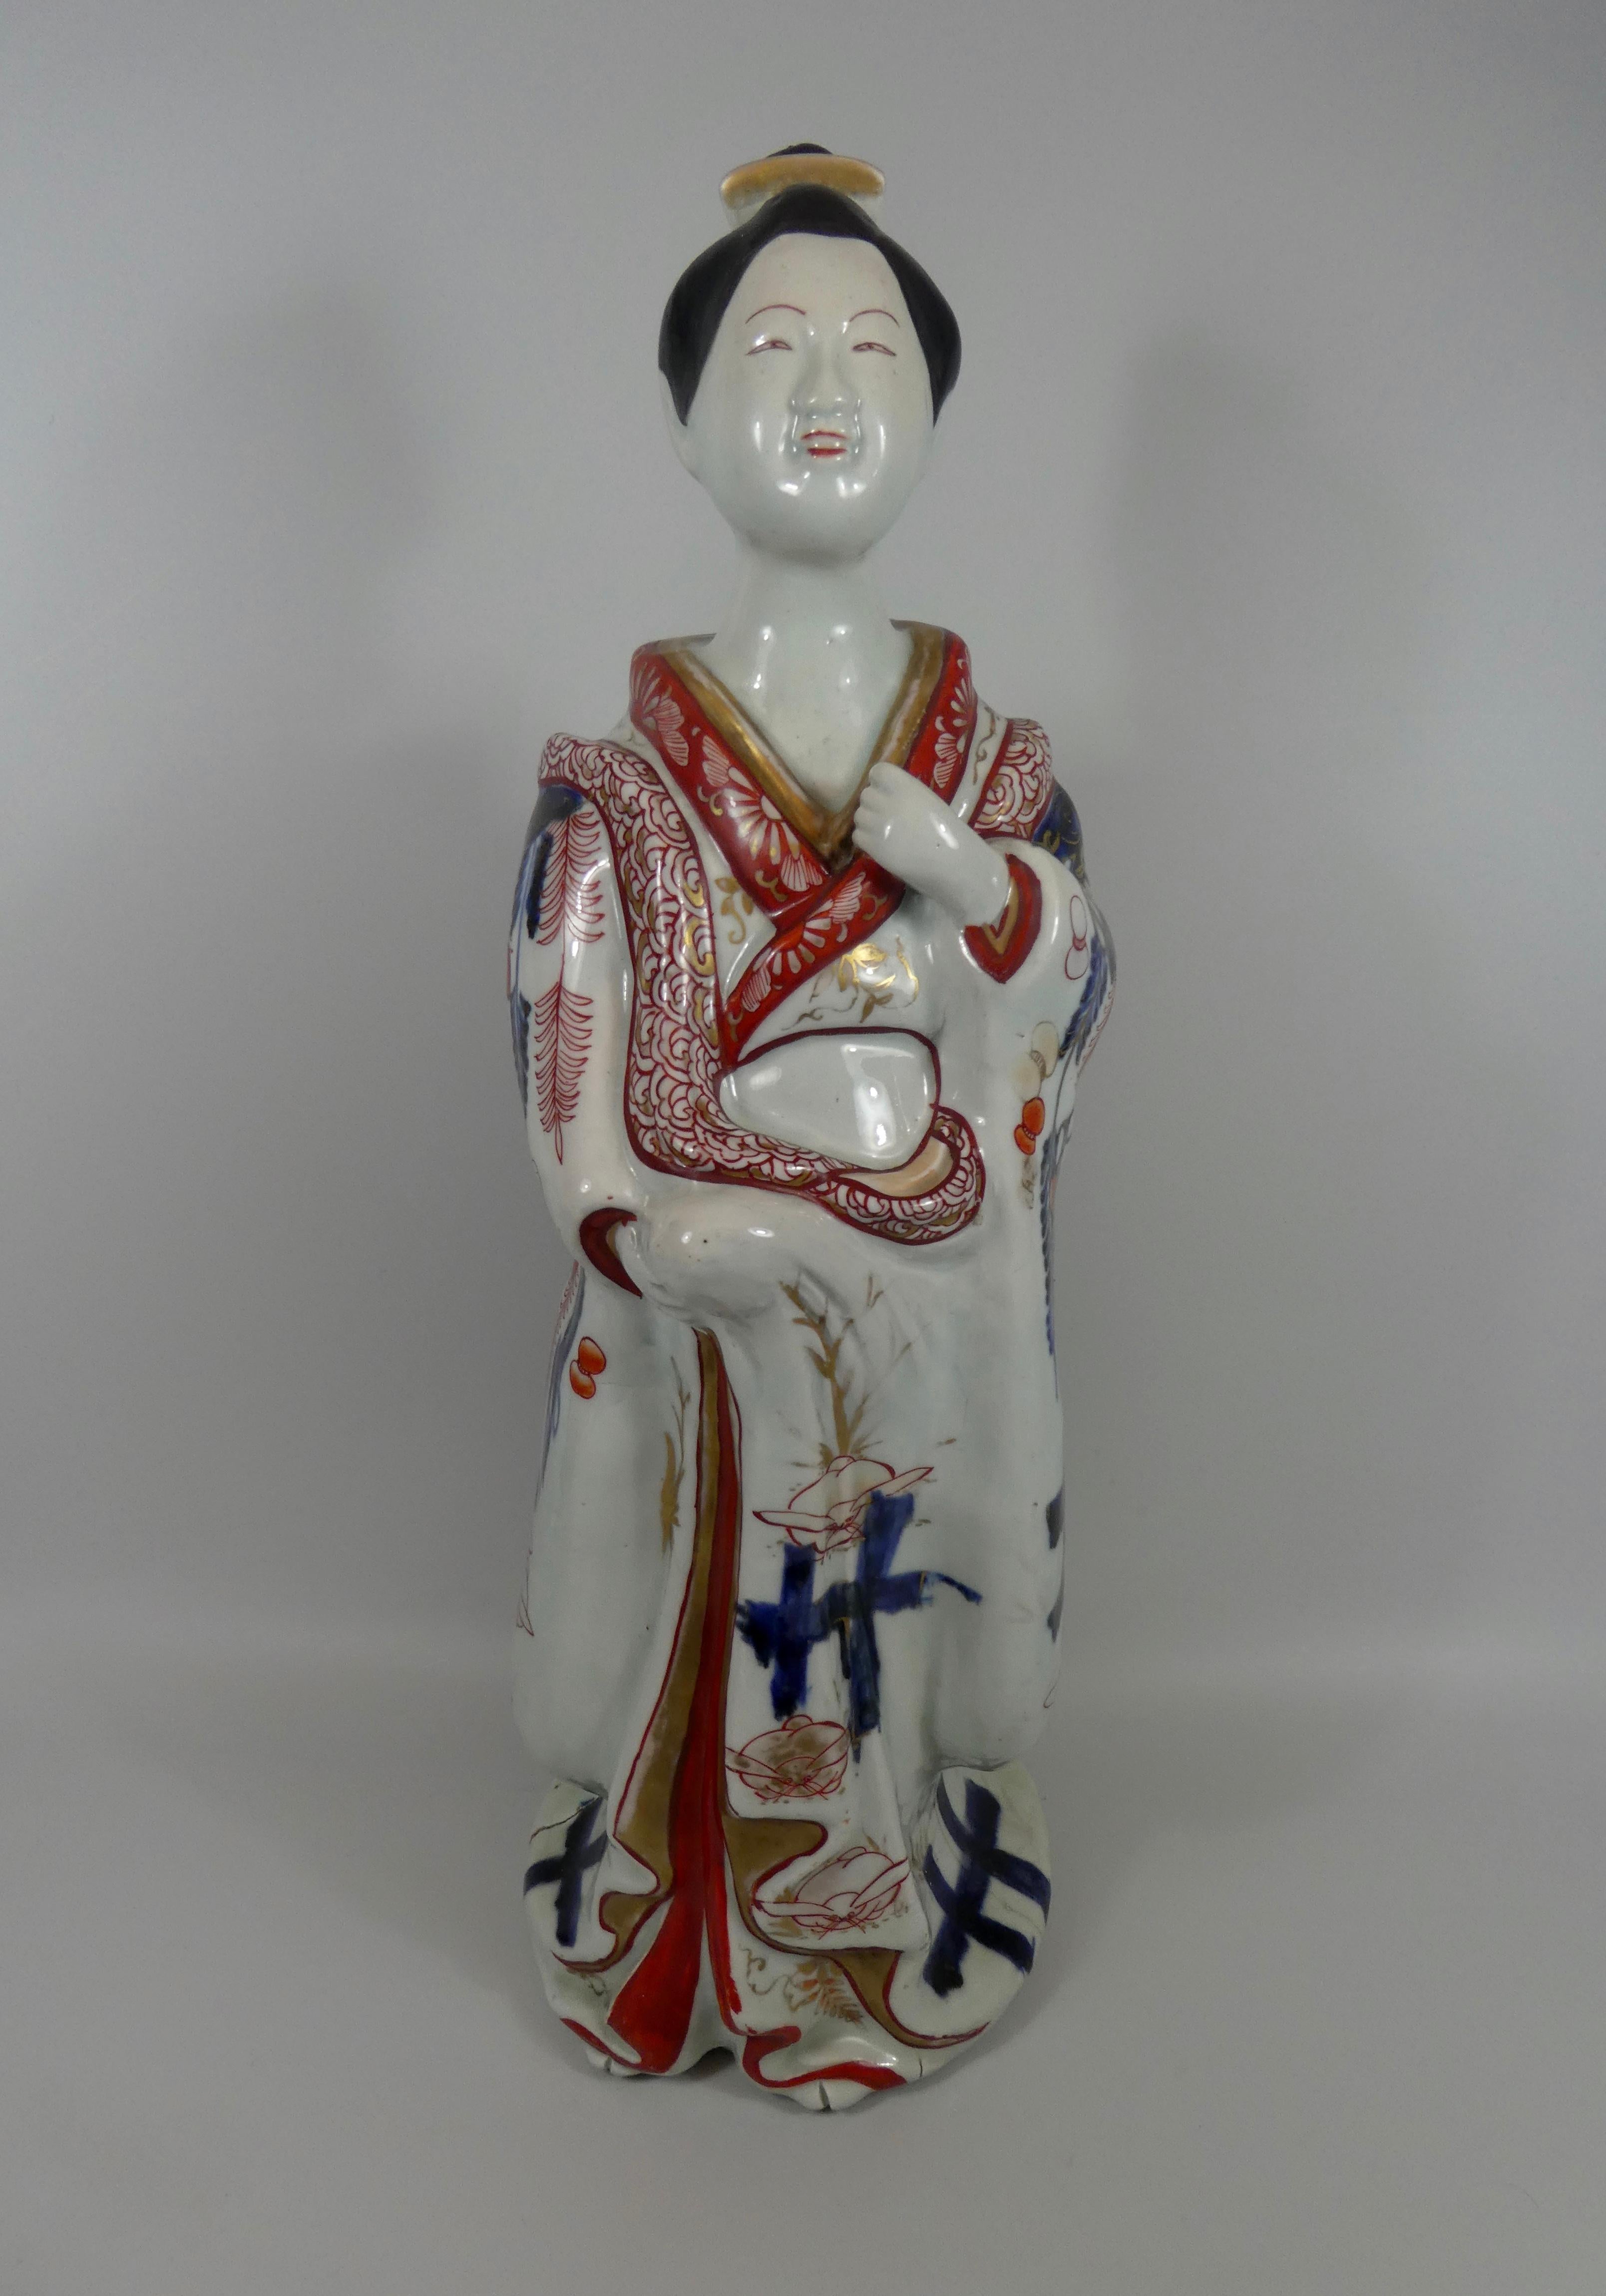 A fine pair of Japanese Imari Bijin, late 17th century, Genroku Period (1688-1704). Both figures modelled, standing with their left hands raised to their chests, whilst their right hands clutch their robes. Their kimonos, elaborately painted with